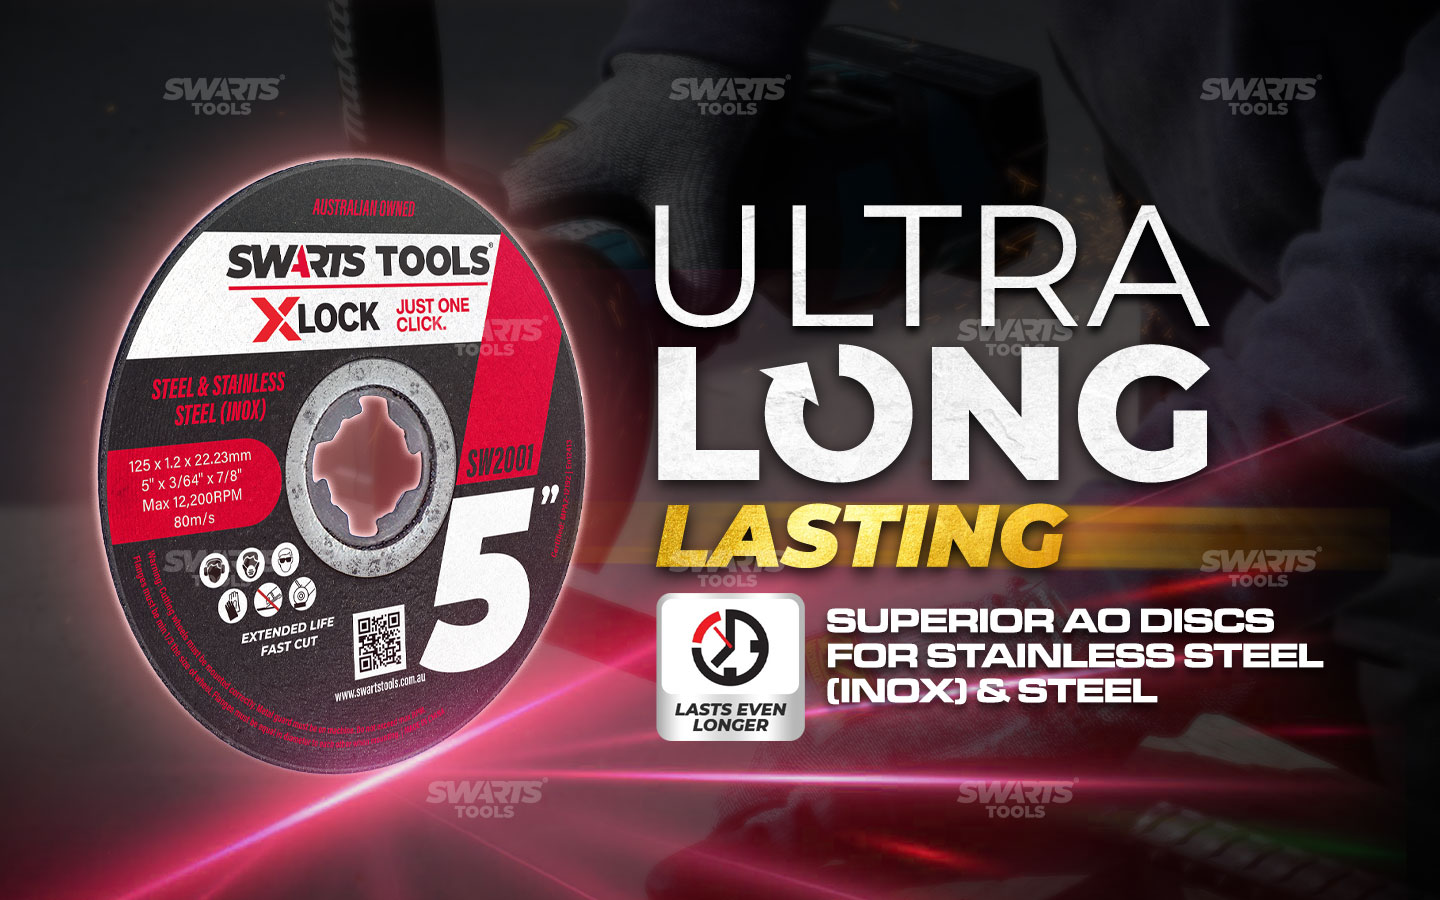 Ultra long lasting, Superior AO discs for stainless steel (inox) & steel